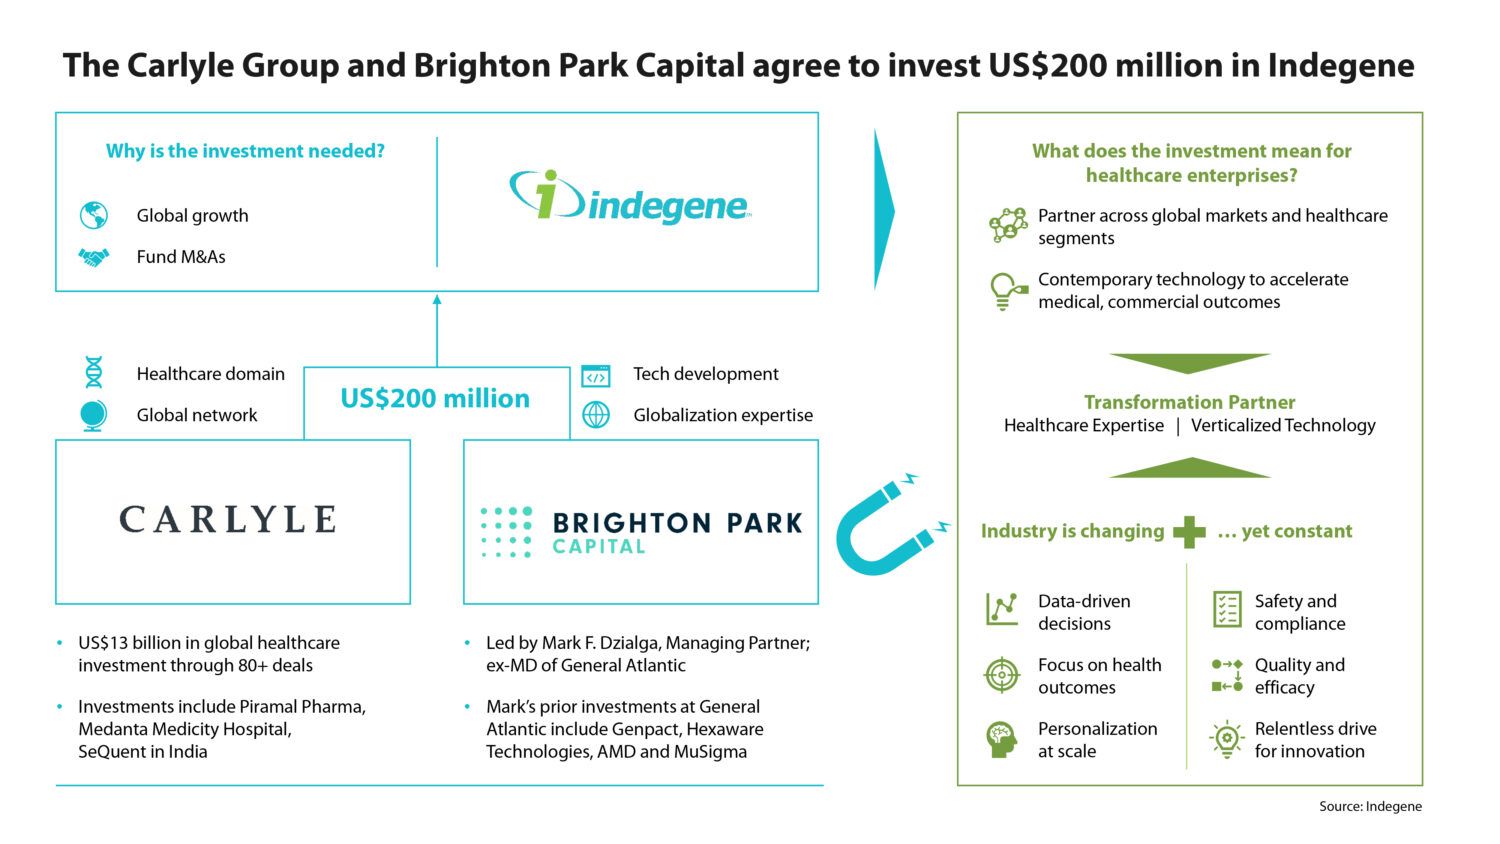 Carlyle and Brighton Park agree to invest US$200 million in Indegene